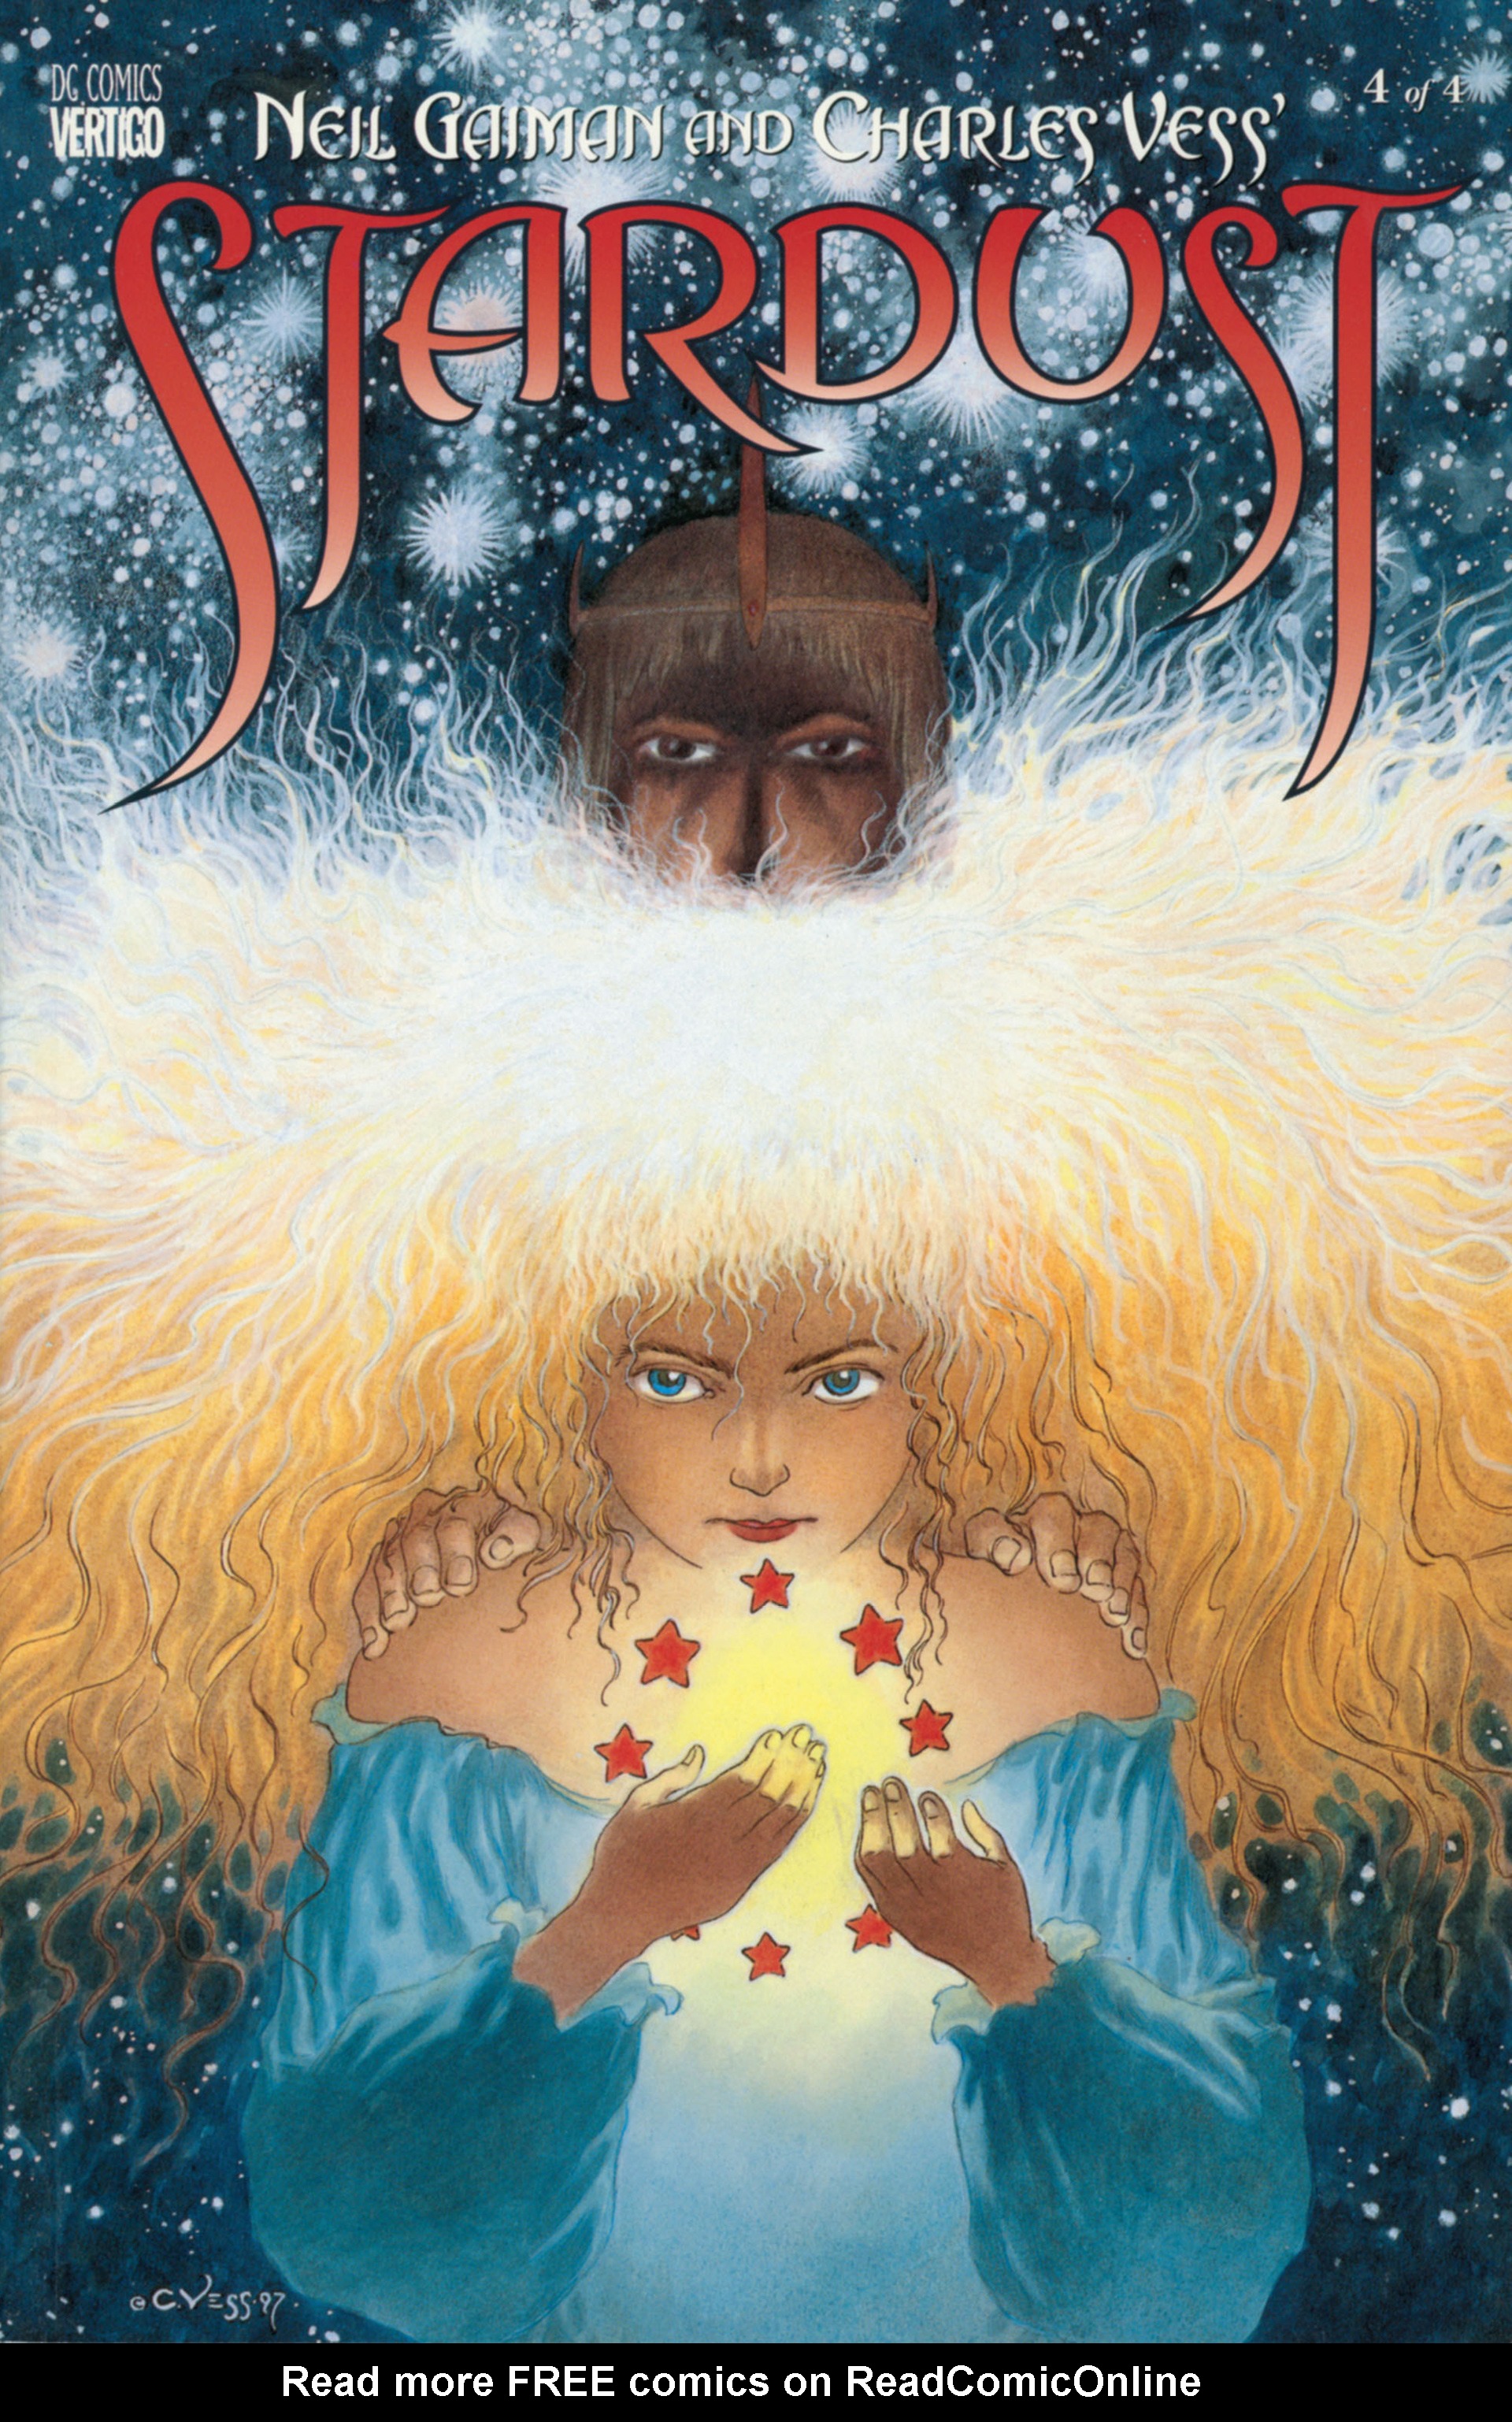 Read online Neil Gaiman and Charles Vess' Stardust comic -  Issue #4 - 1